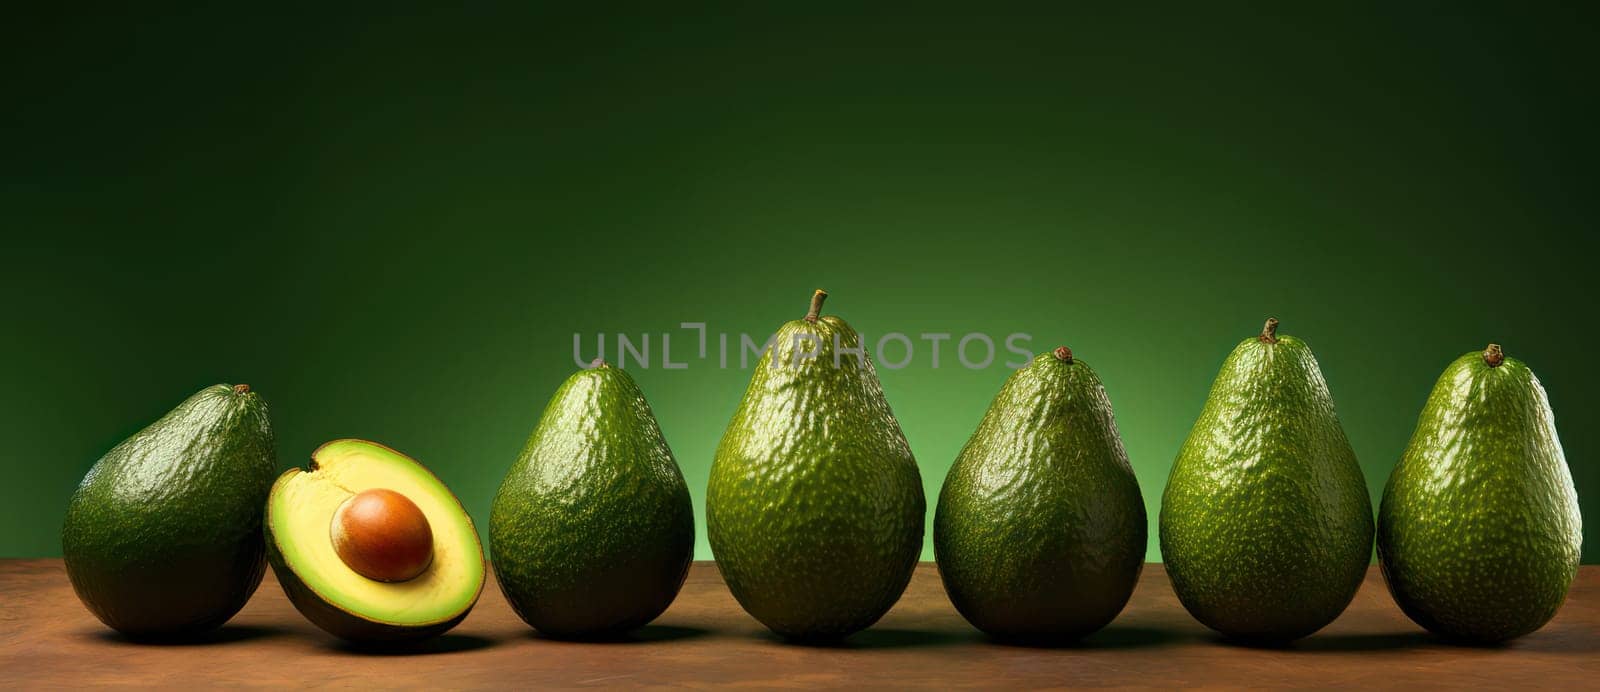 Fresh, Organic Avocado Slices on Wooden Table: Nature's Healthy Green Delight and Delicious Snack